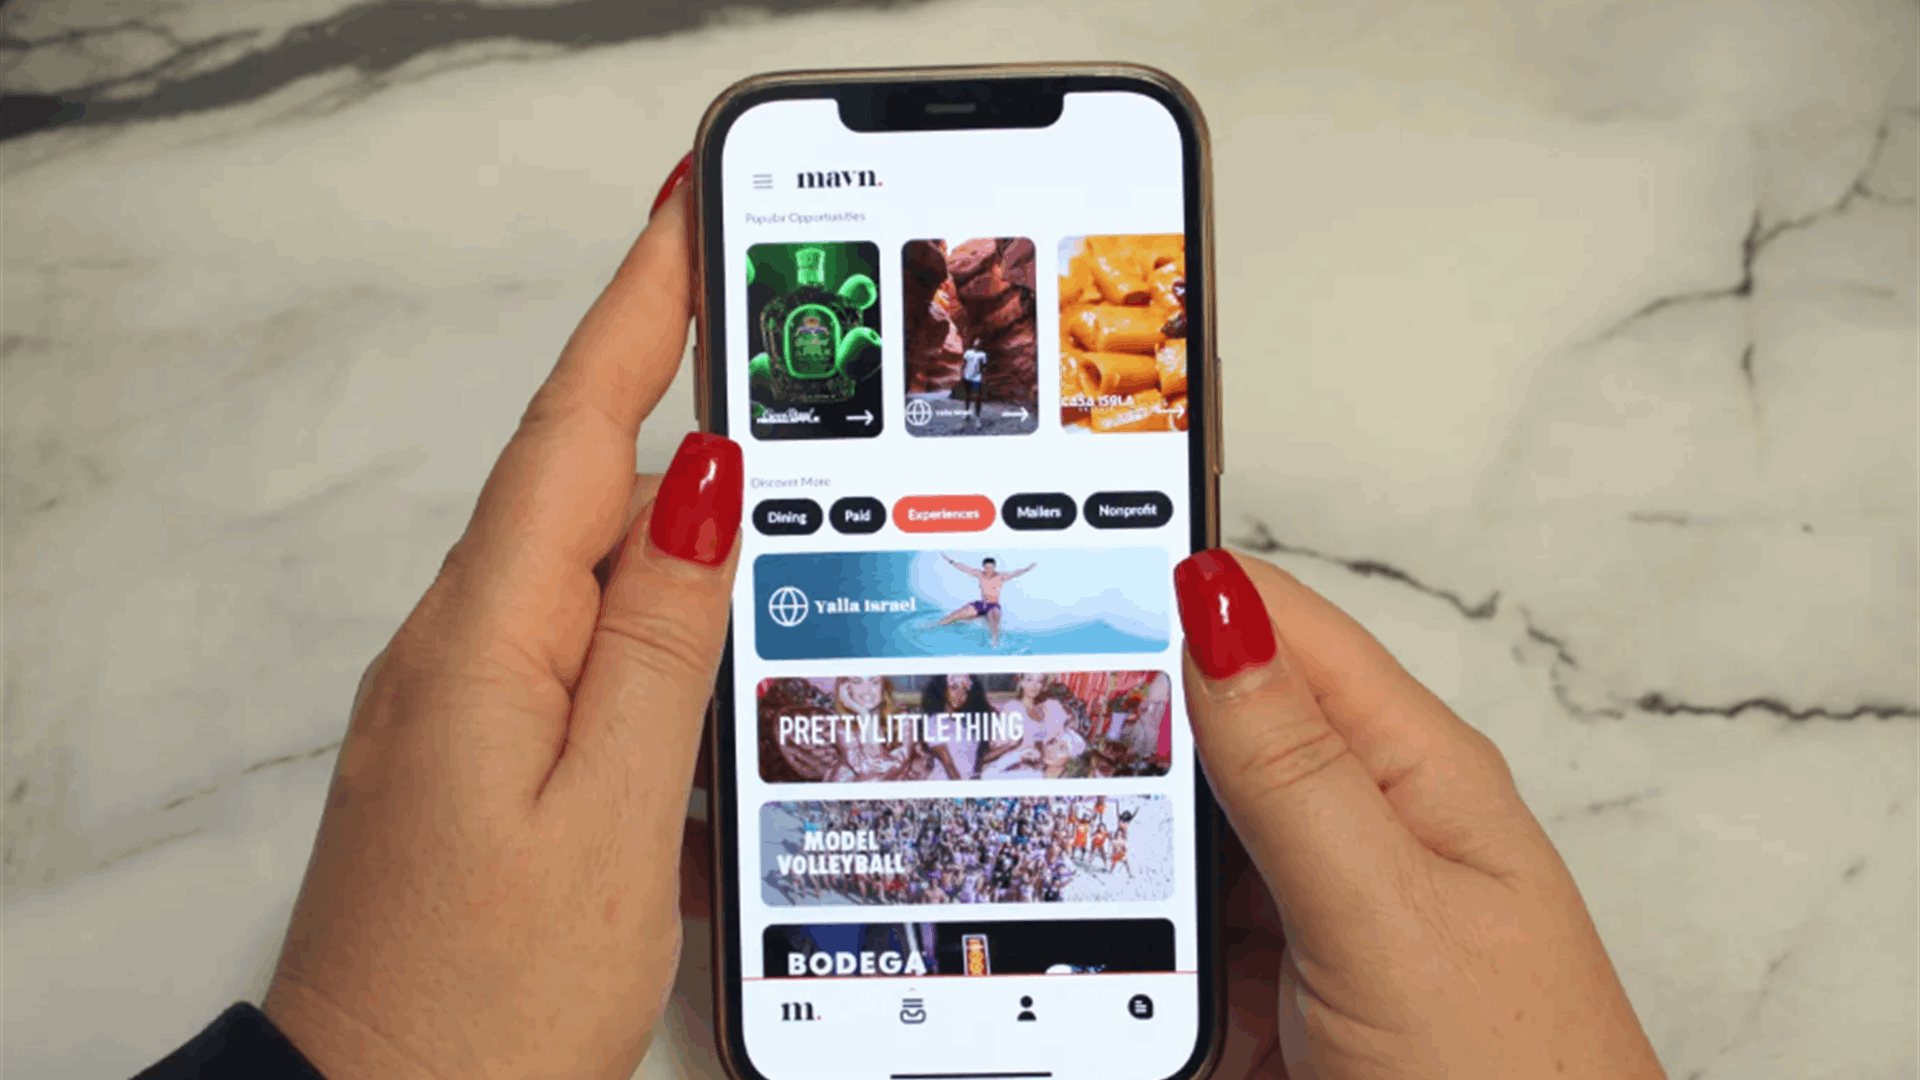 Mavn launches its app to connect influencers with brands and provide paid experiences